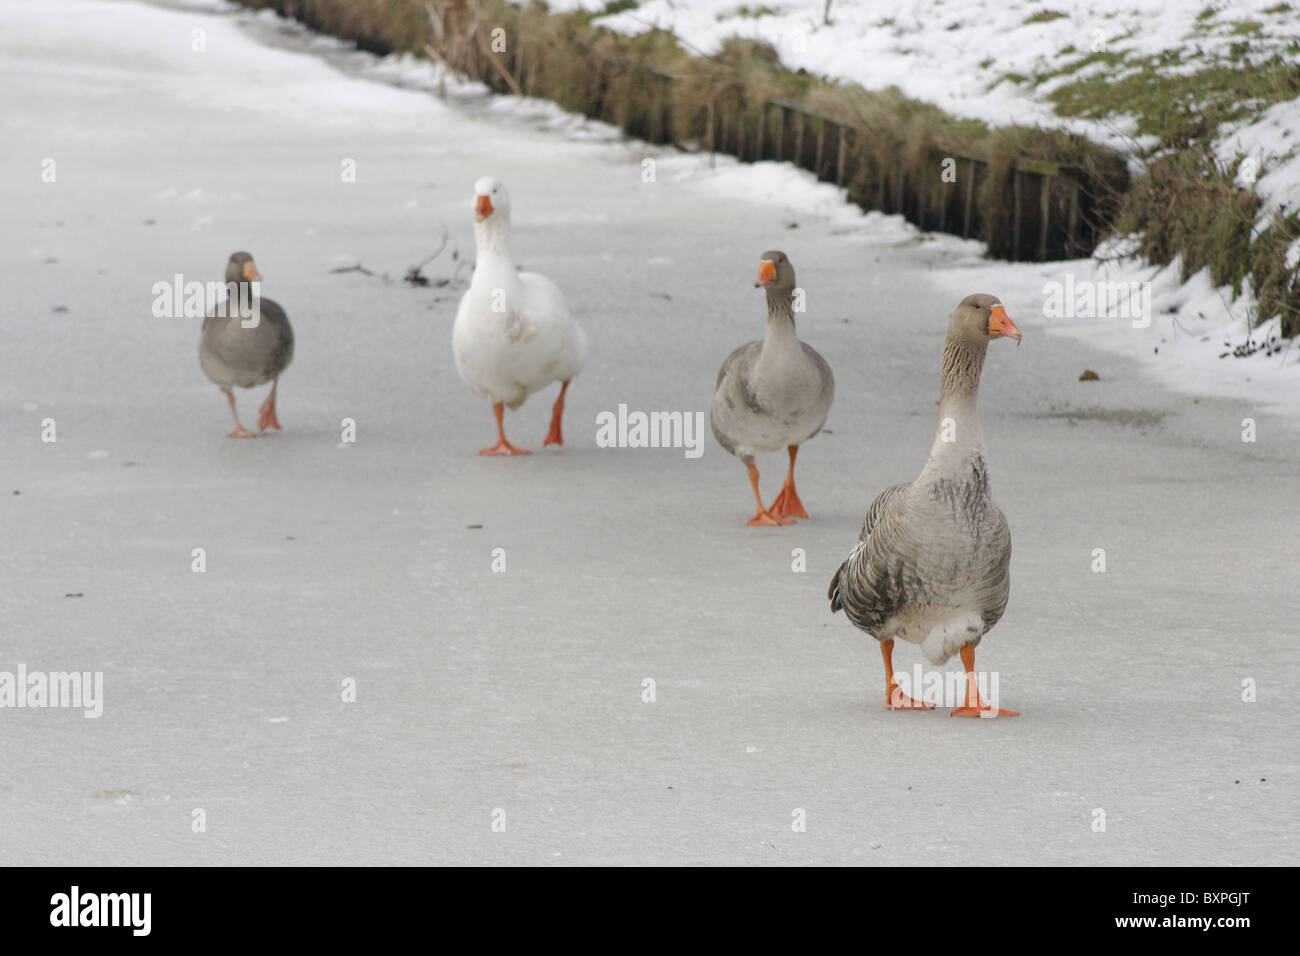 Greylag geese (Anser anser) on a frozen pond in The Hague, Netherlands Stock Photo